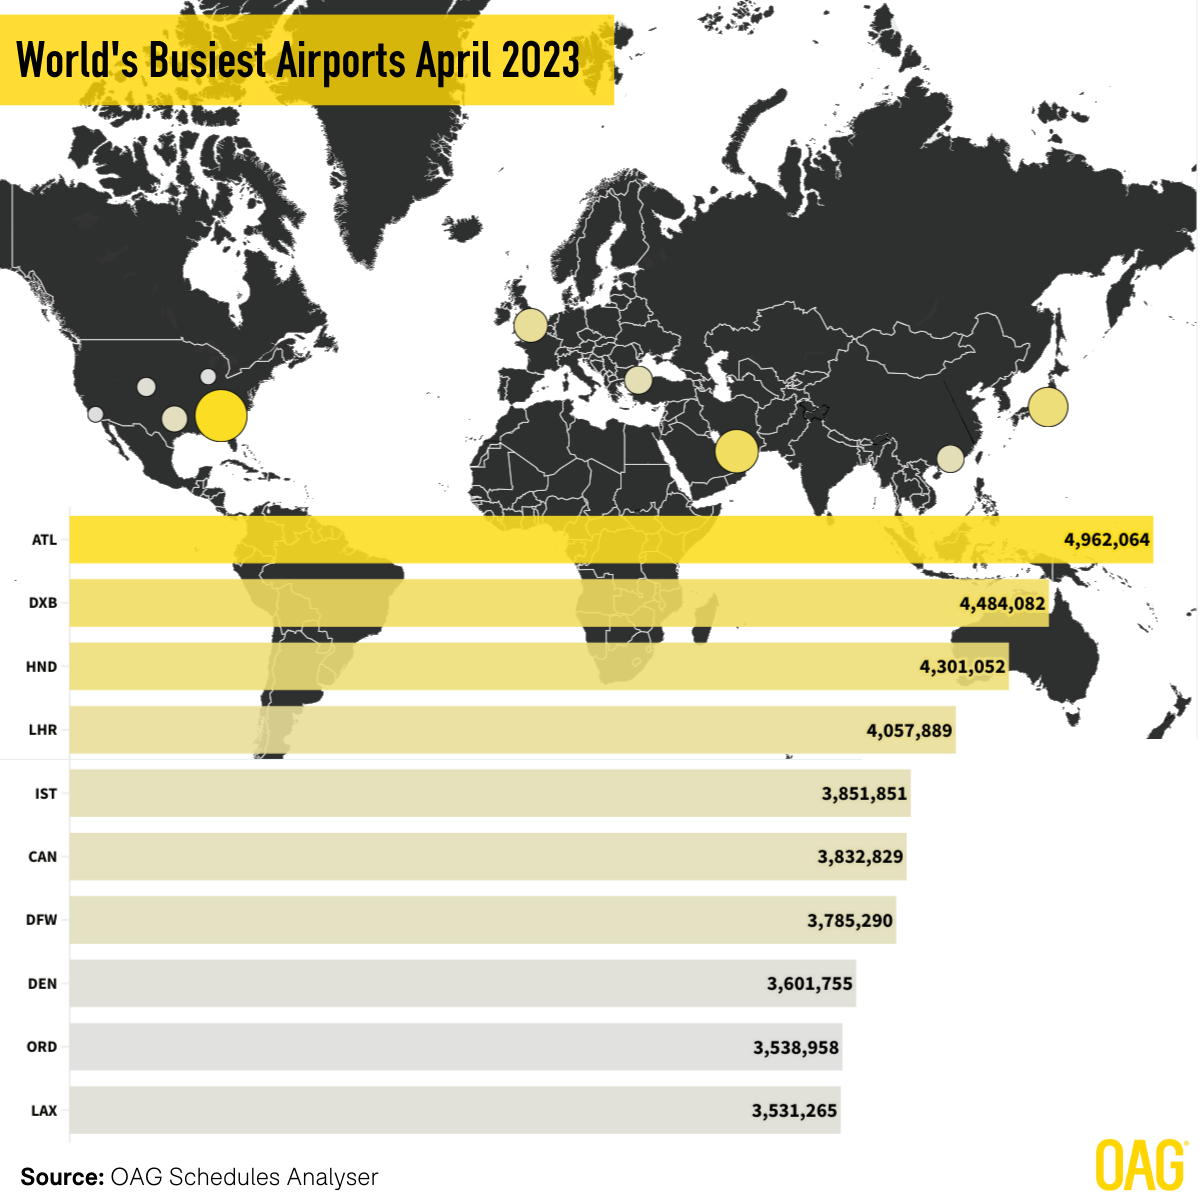 Busiest Airports April 23